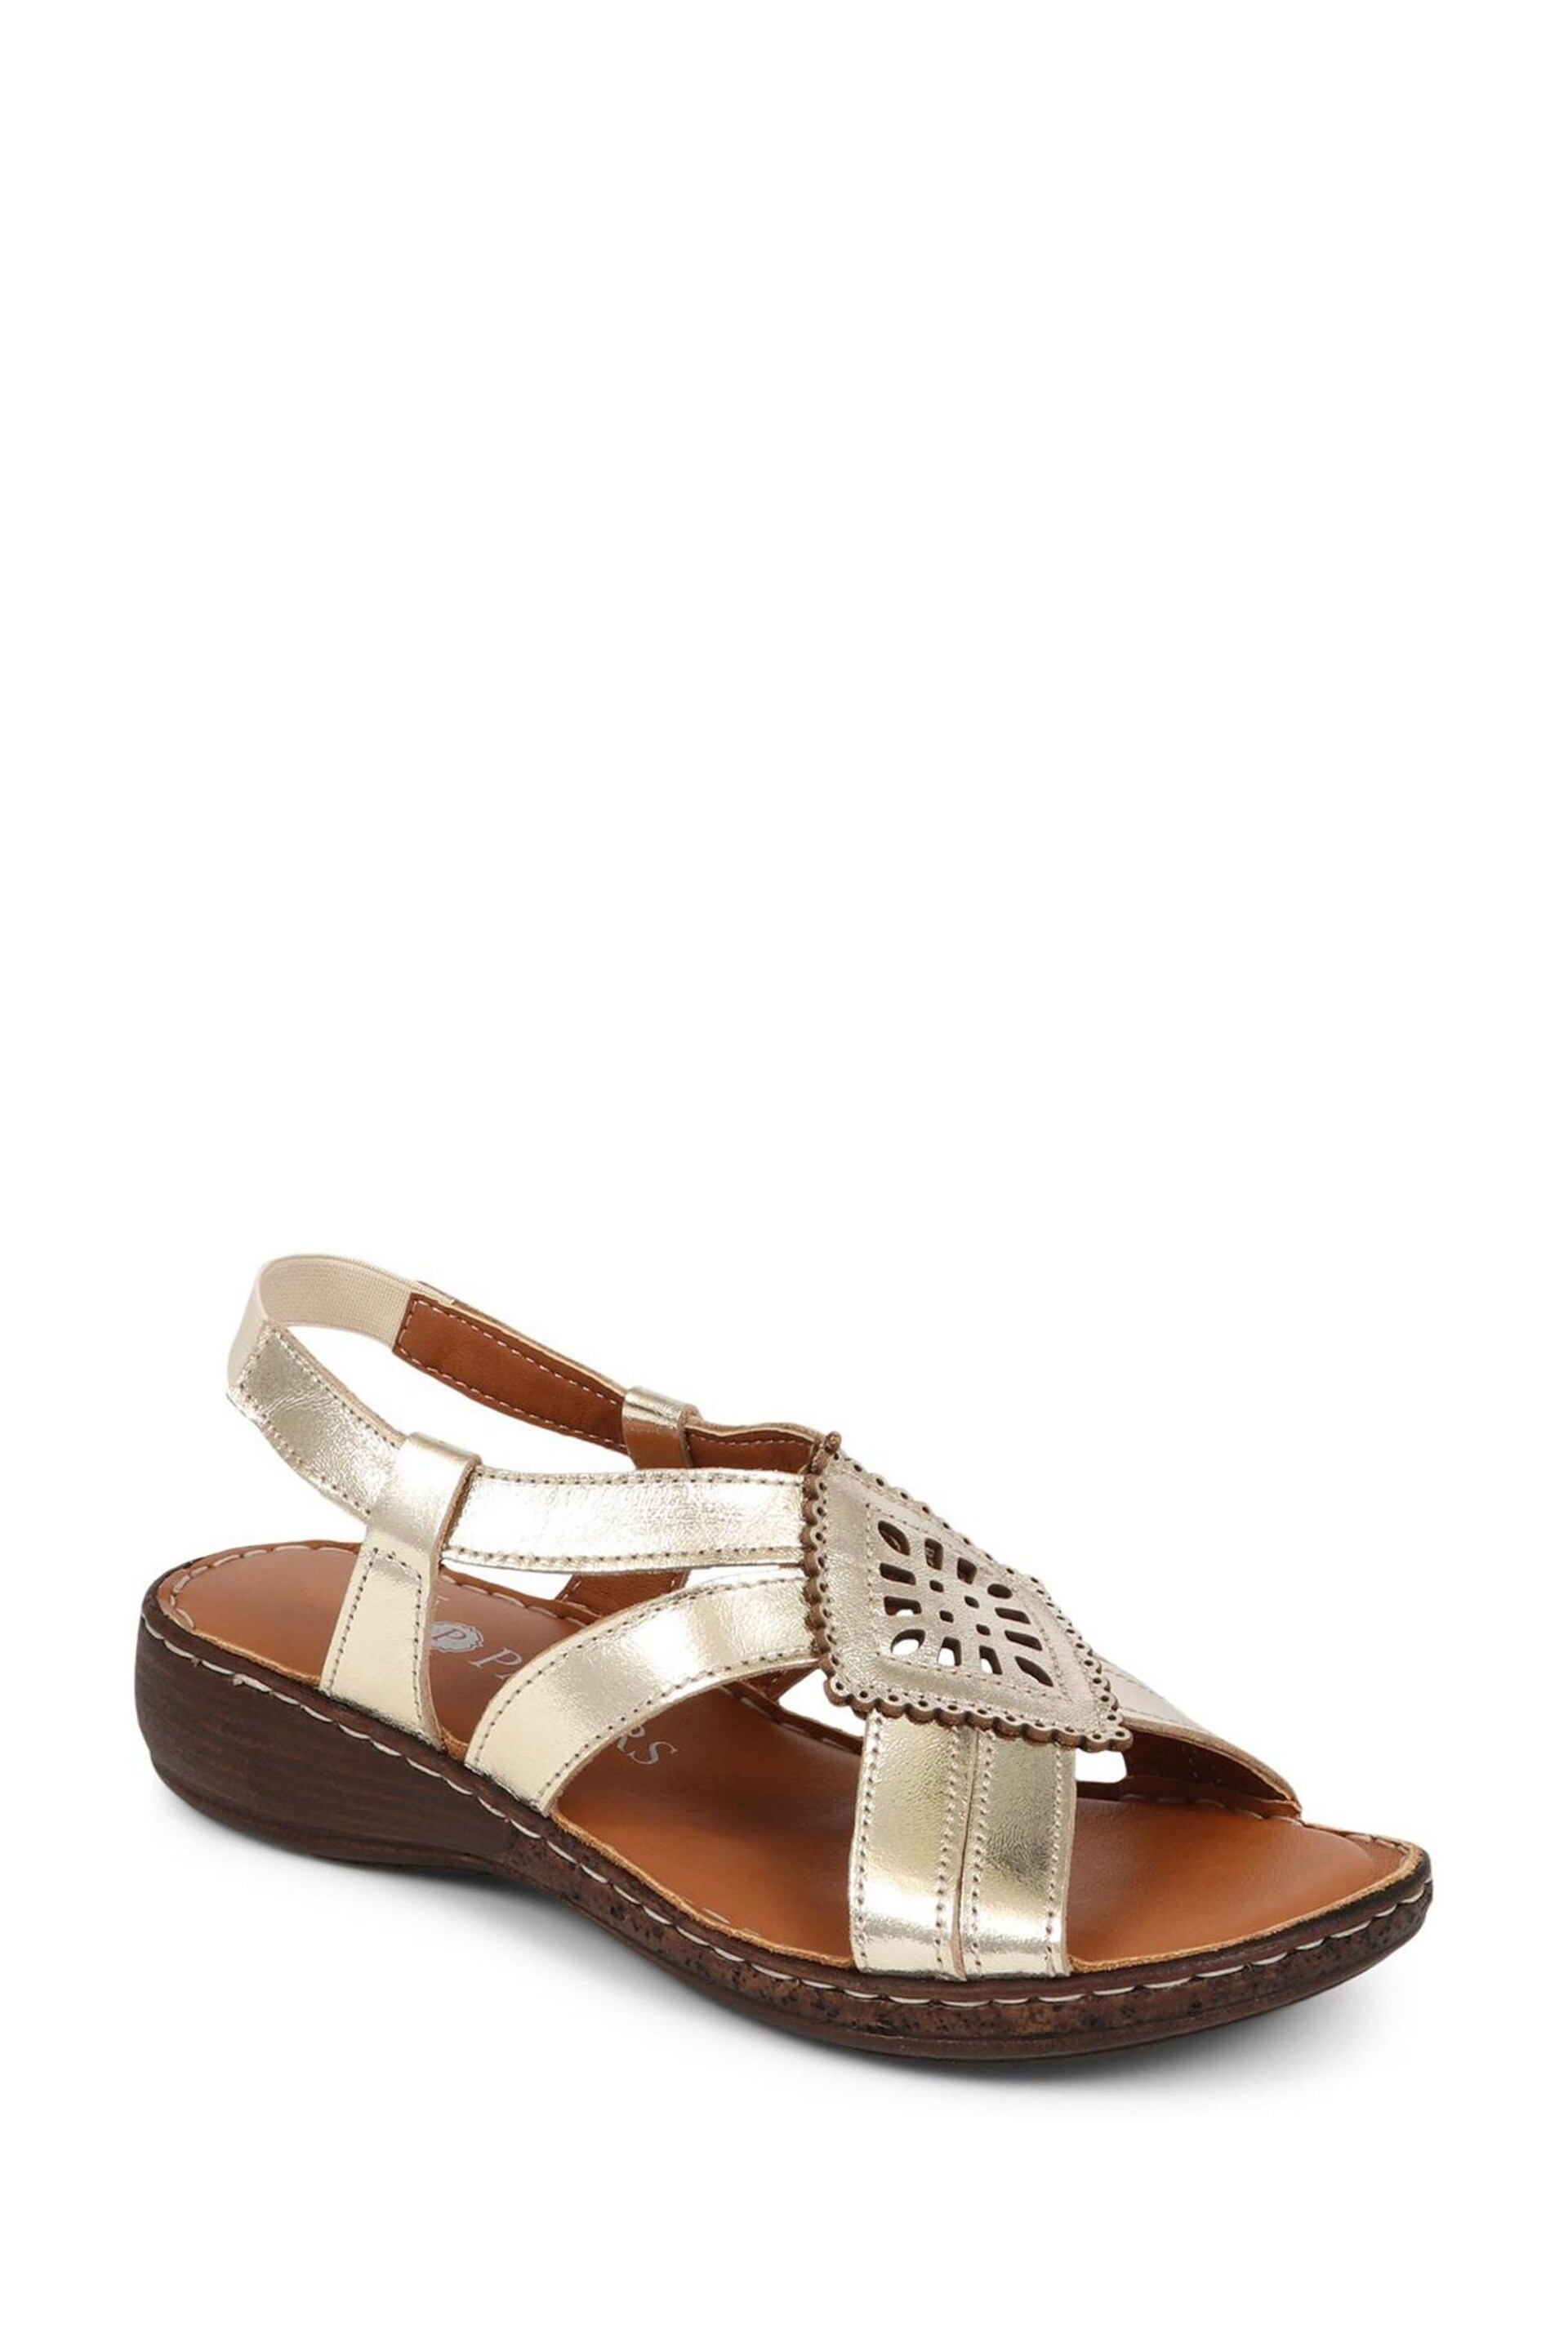 Pavers Leather Slingback Sandals - Image 4 of 5